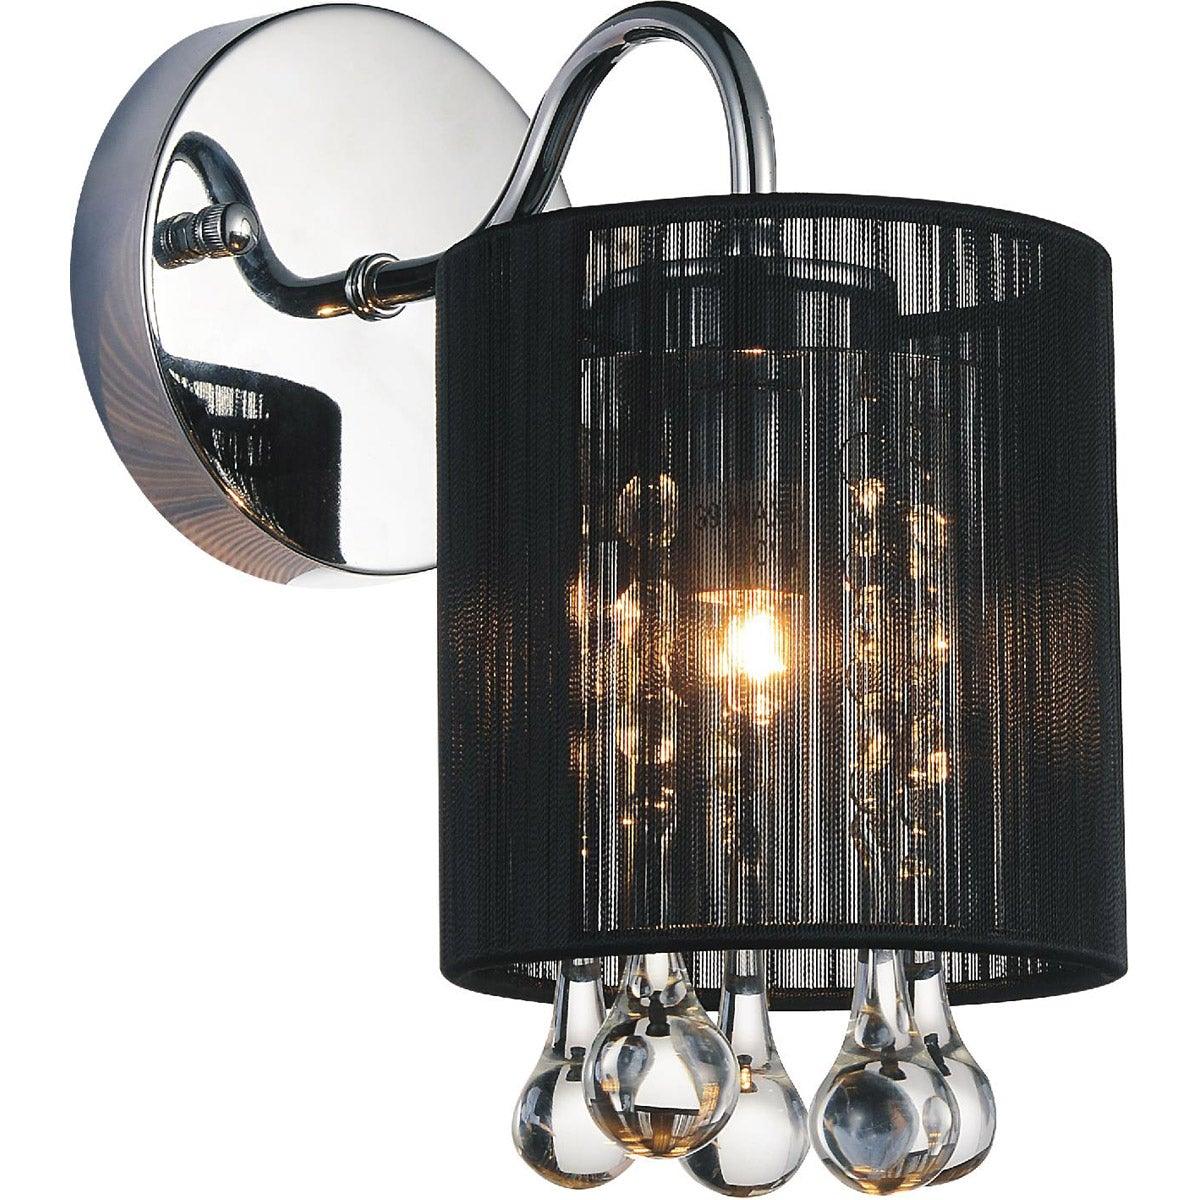 Chrome with Crystal Drop and Fabric Shade Wall Sconce - LV LIGHTING